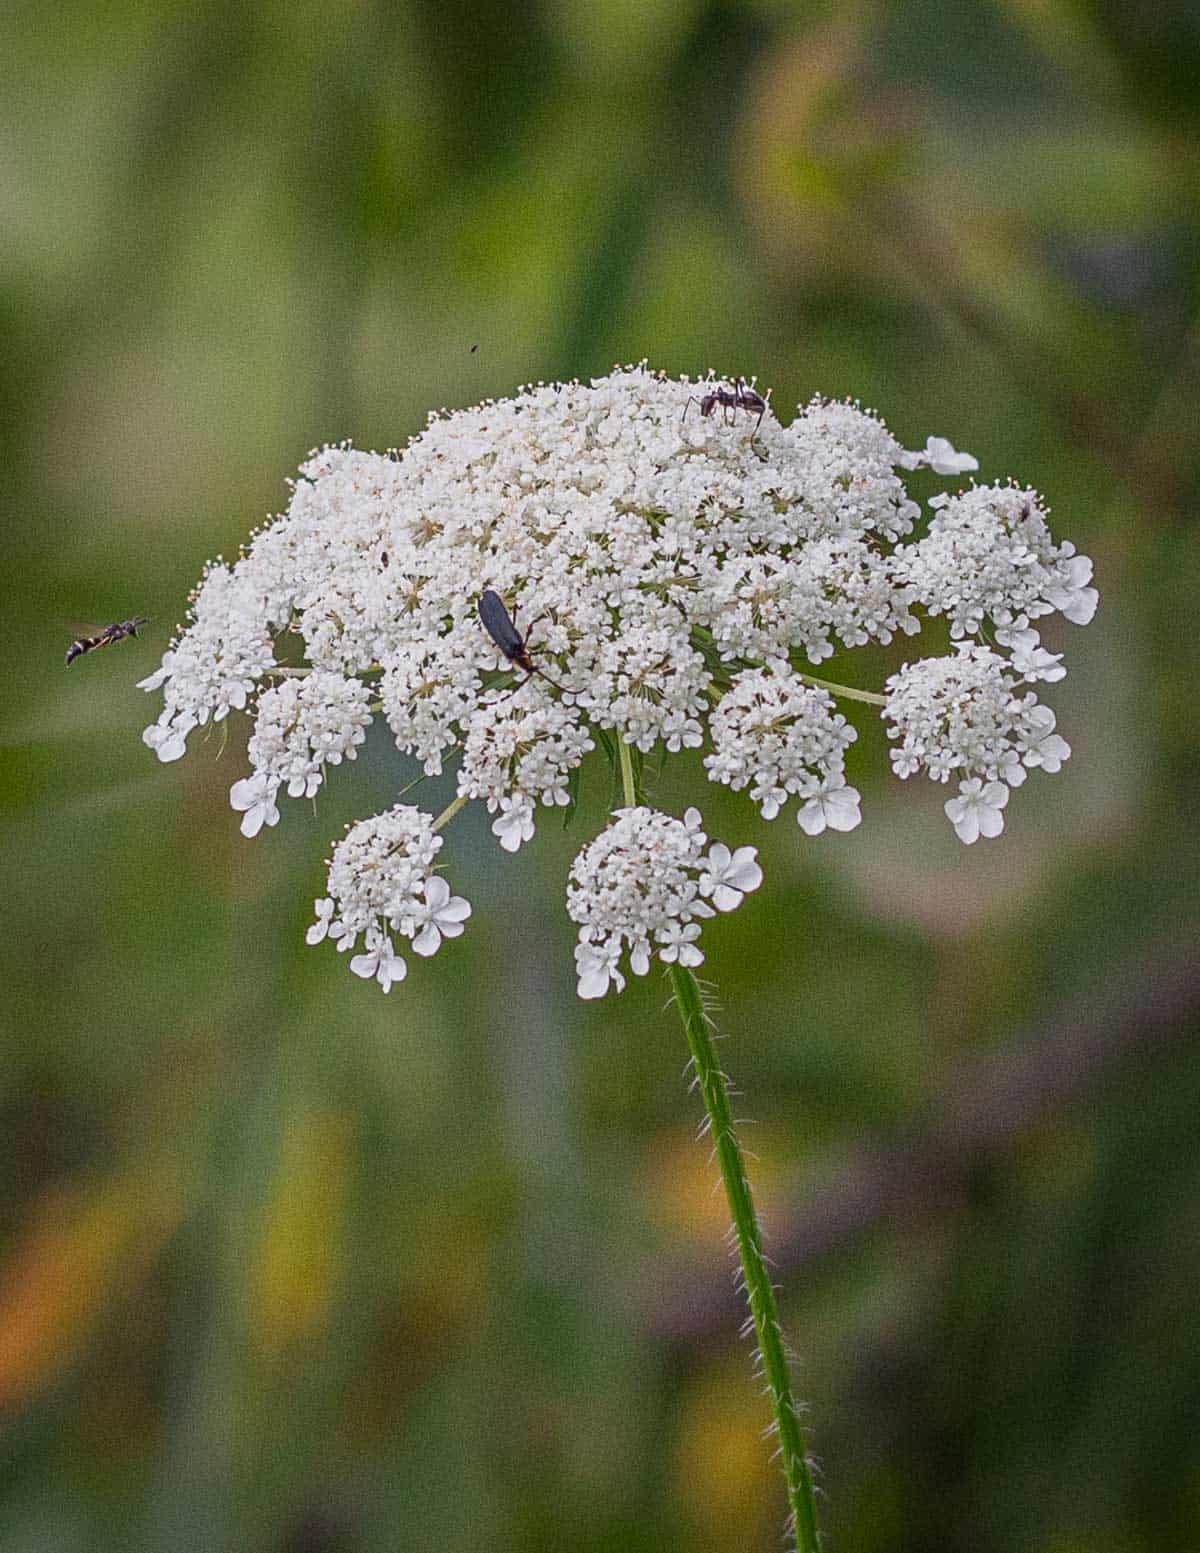 A close up image of wild carrot flowers with insects coming for nectar. 